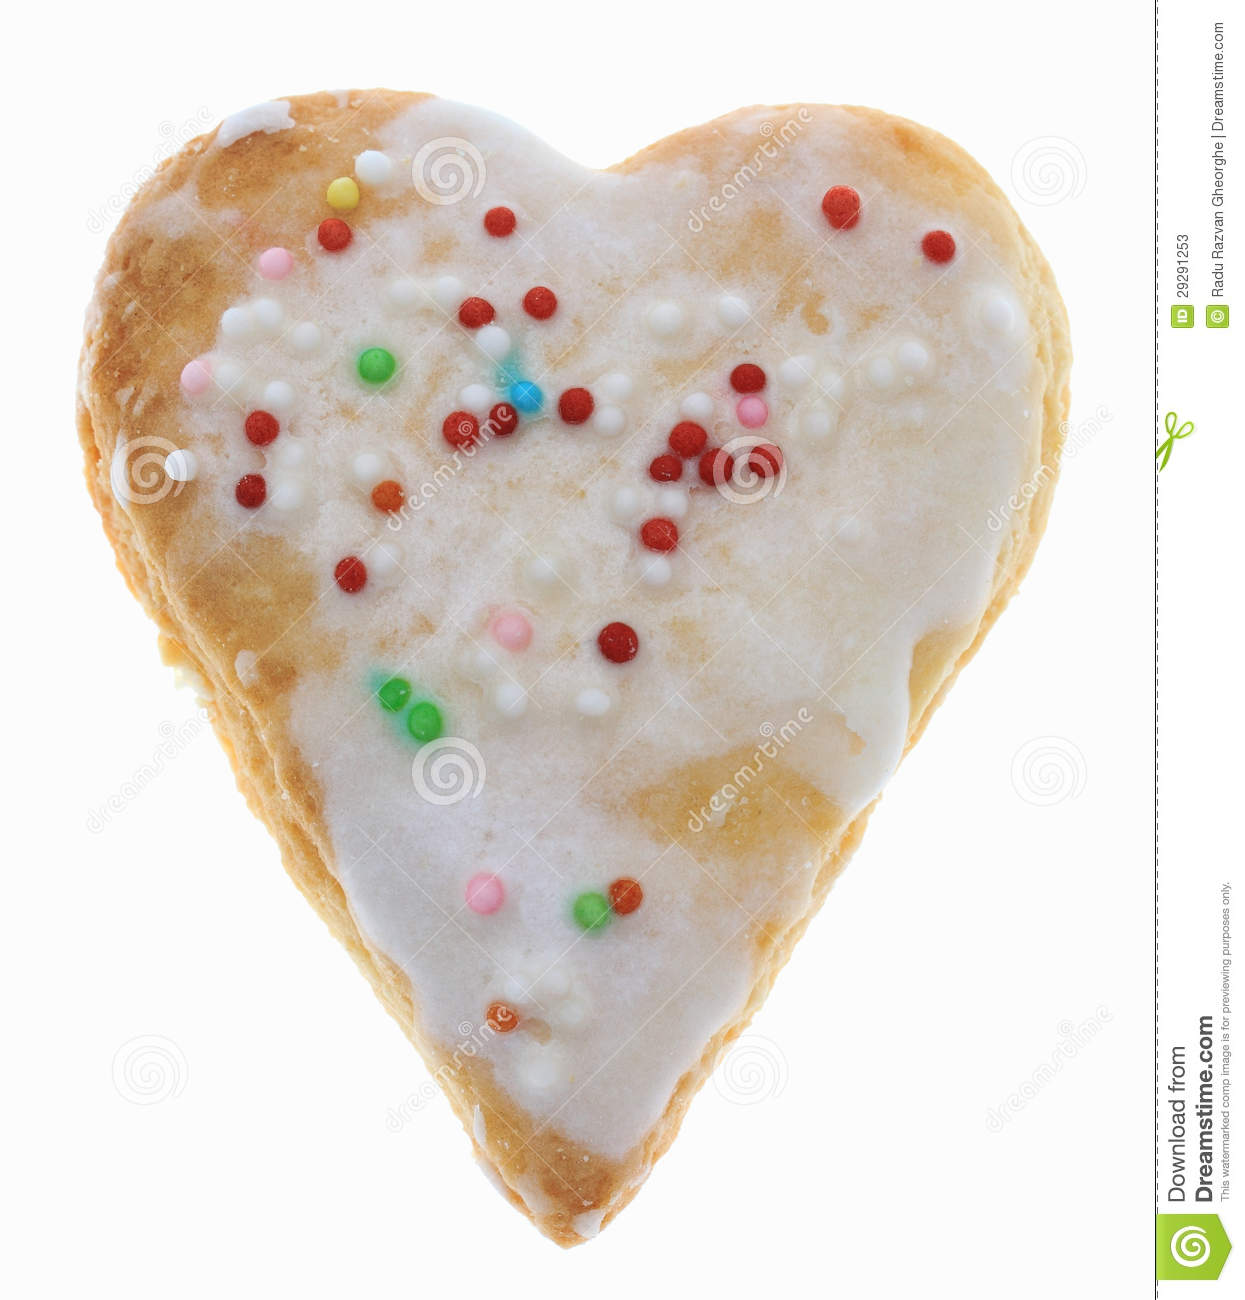 Heart Shaped Cookie Isolated Against A White Background